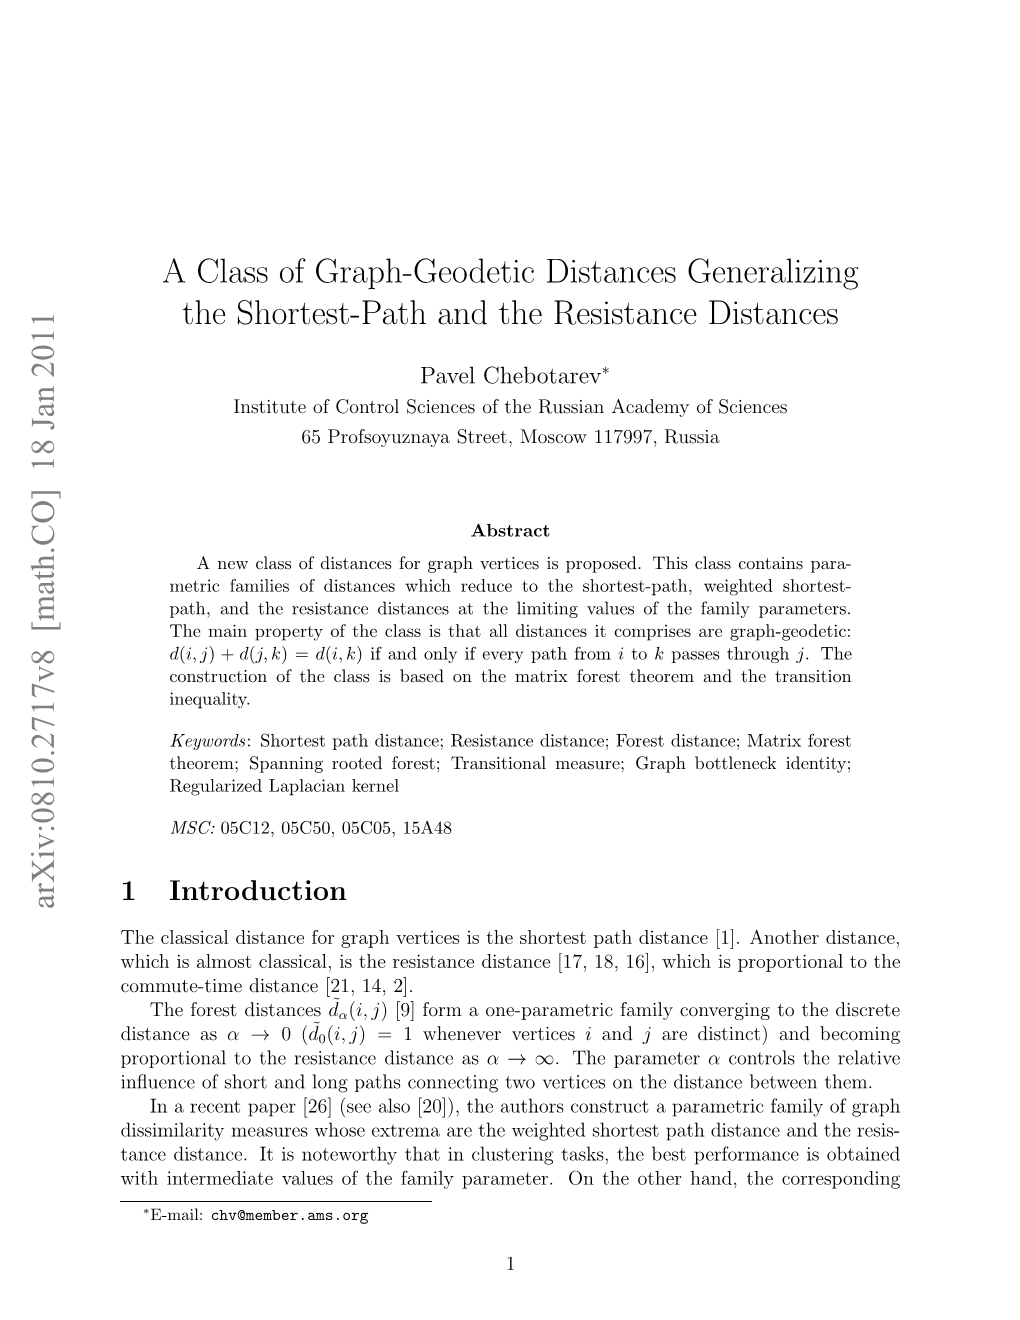 A Class of Graph-Geodetic Distances Generalizing the Shortest-Path and the Resistance Distances